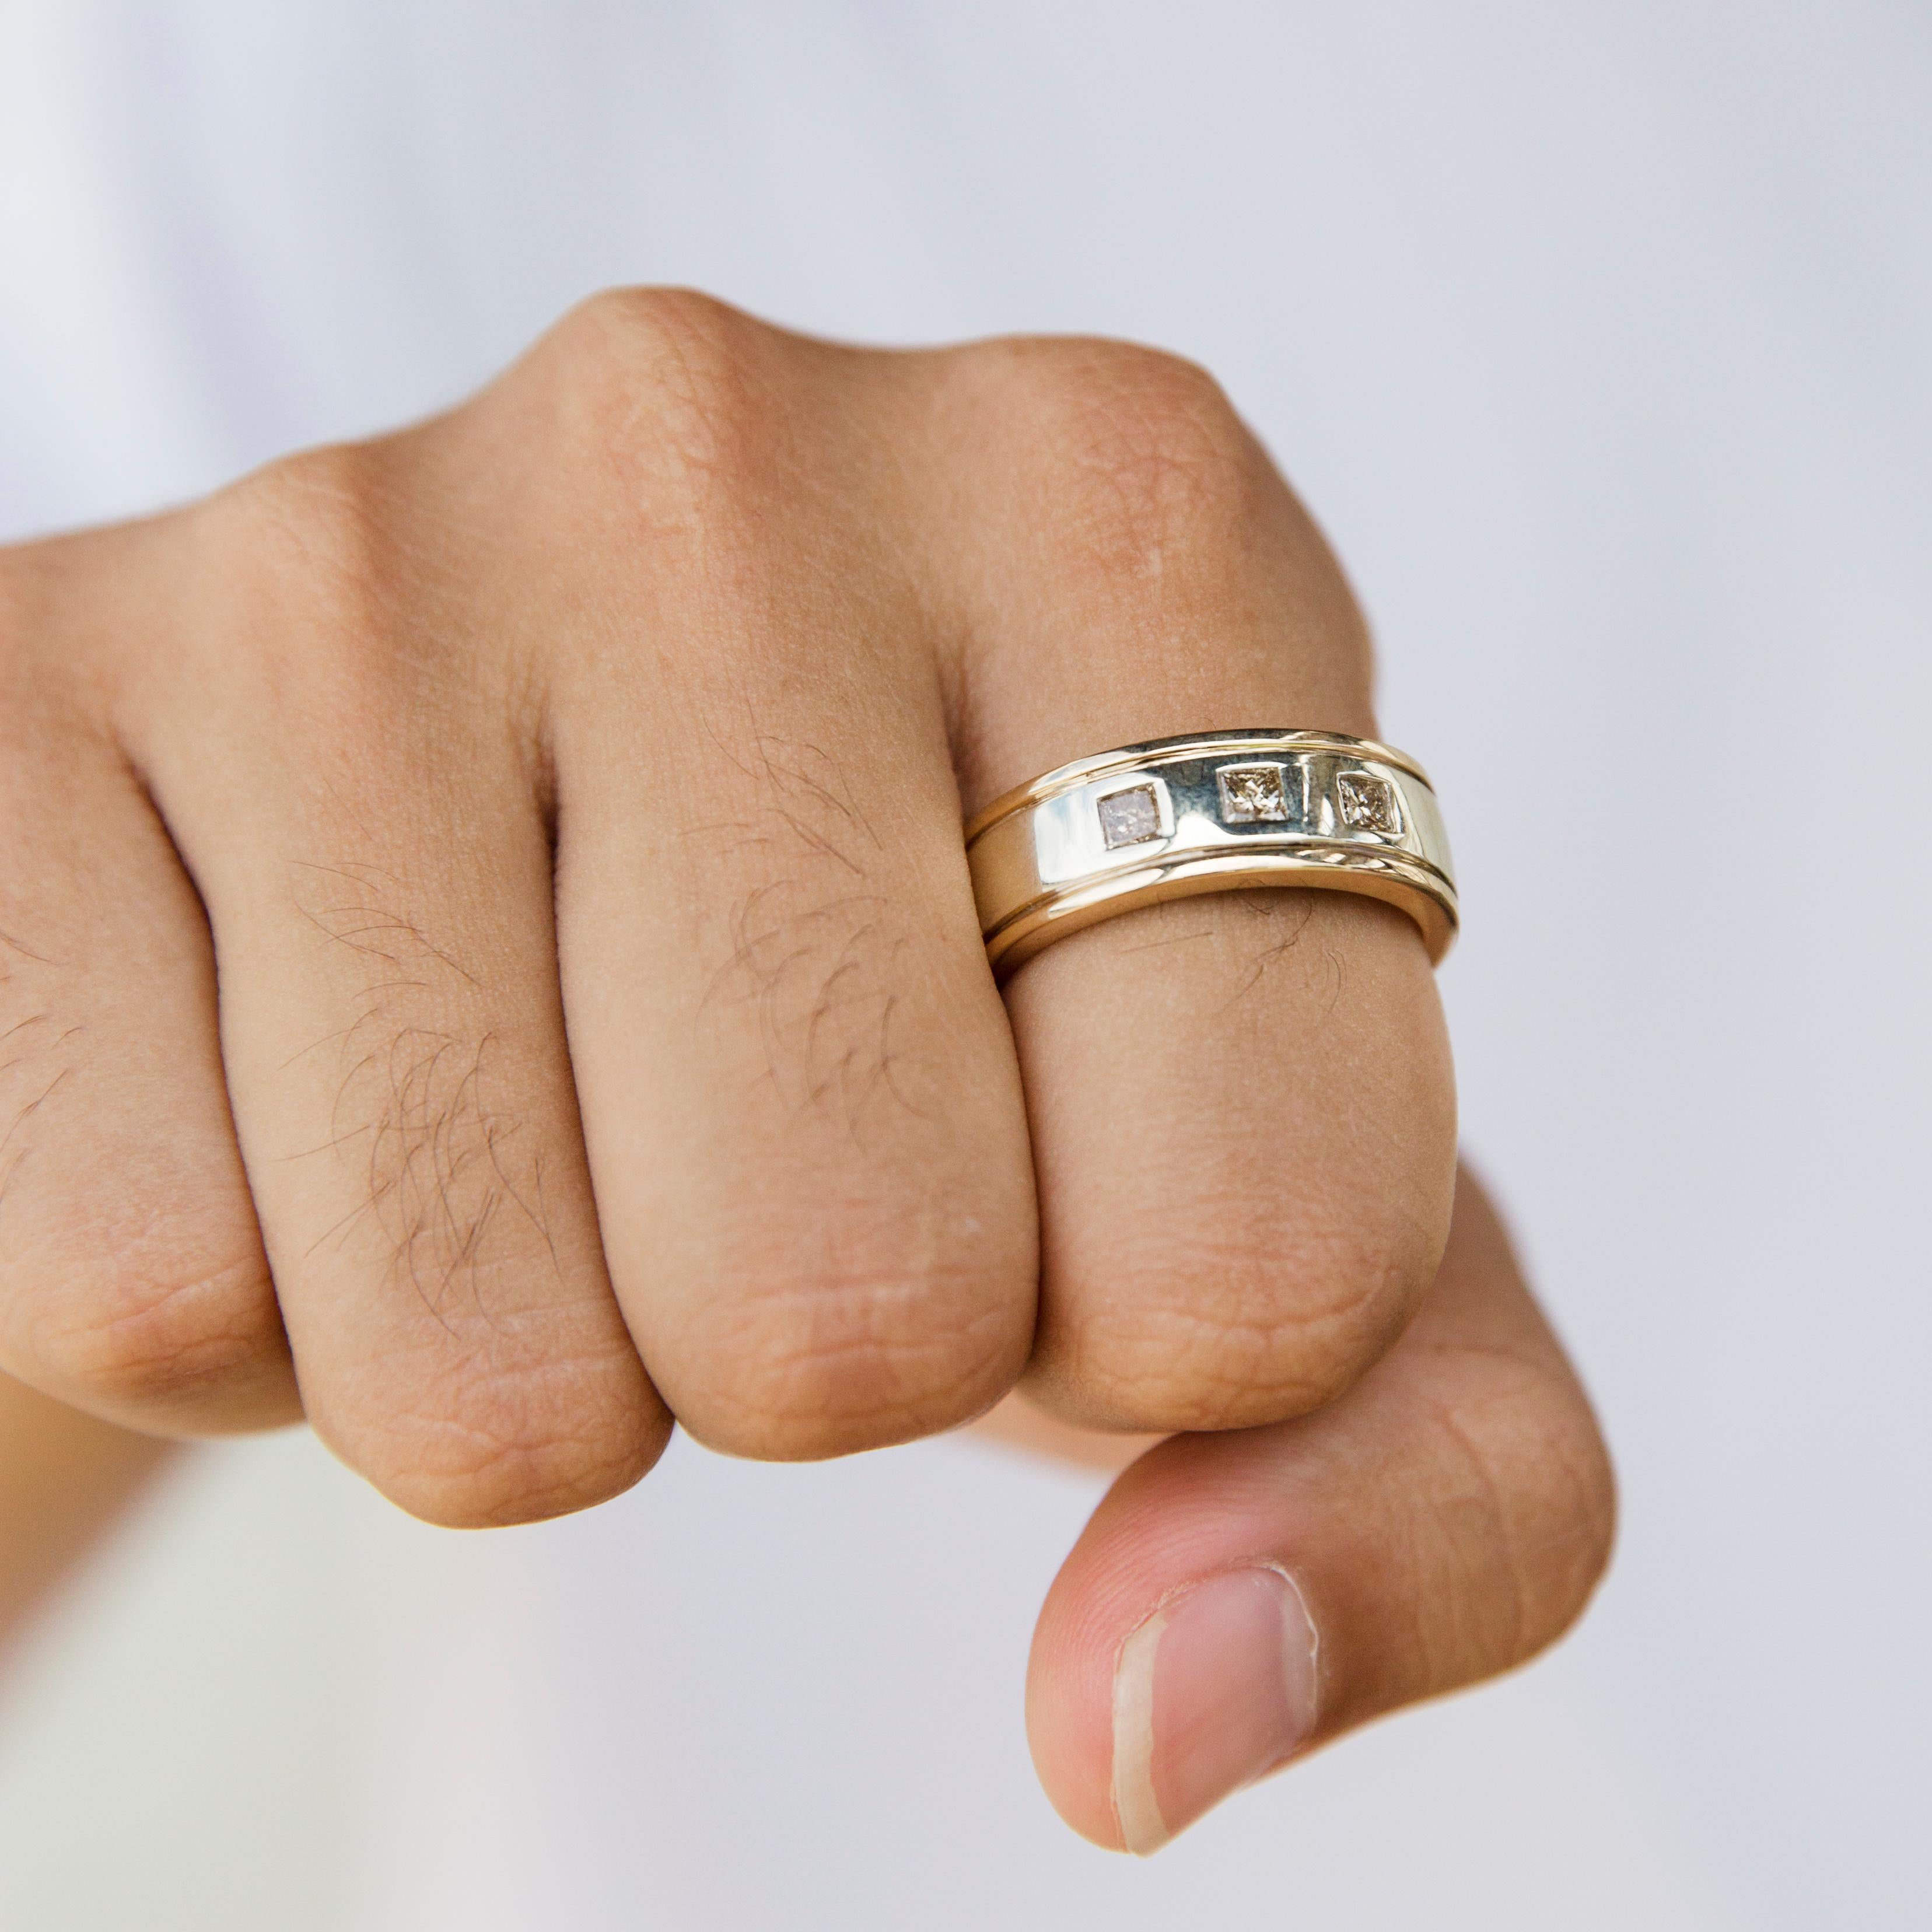 Expertly forged in 9 carat yellow and white gold, this dapper men's ring is the hallmark of the sophisticated man. The elegant two-tone grooved band comes with an opulent high polish finish and three princess cut diamonds hammer set into the frontal